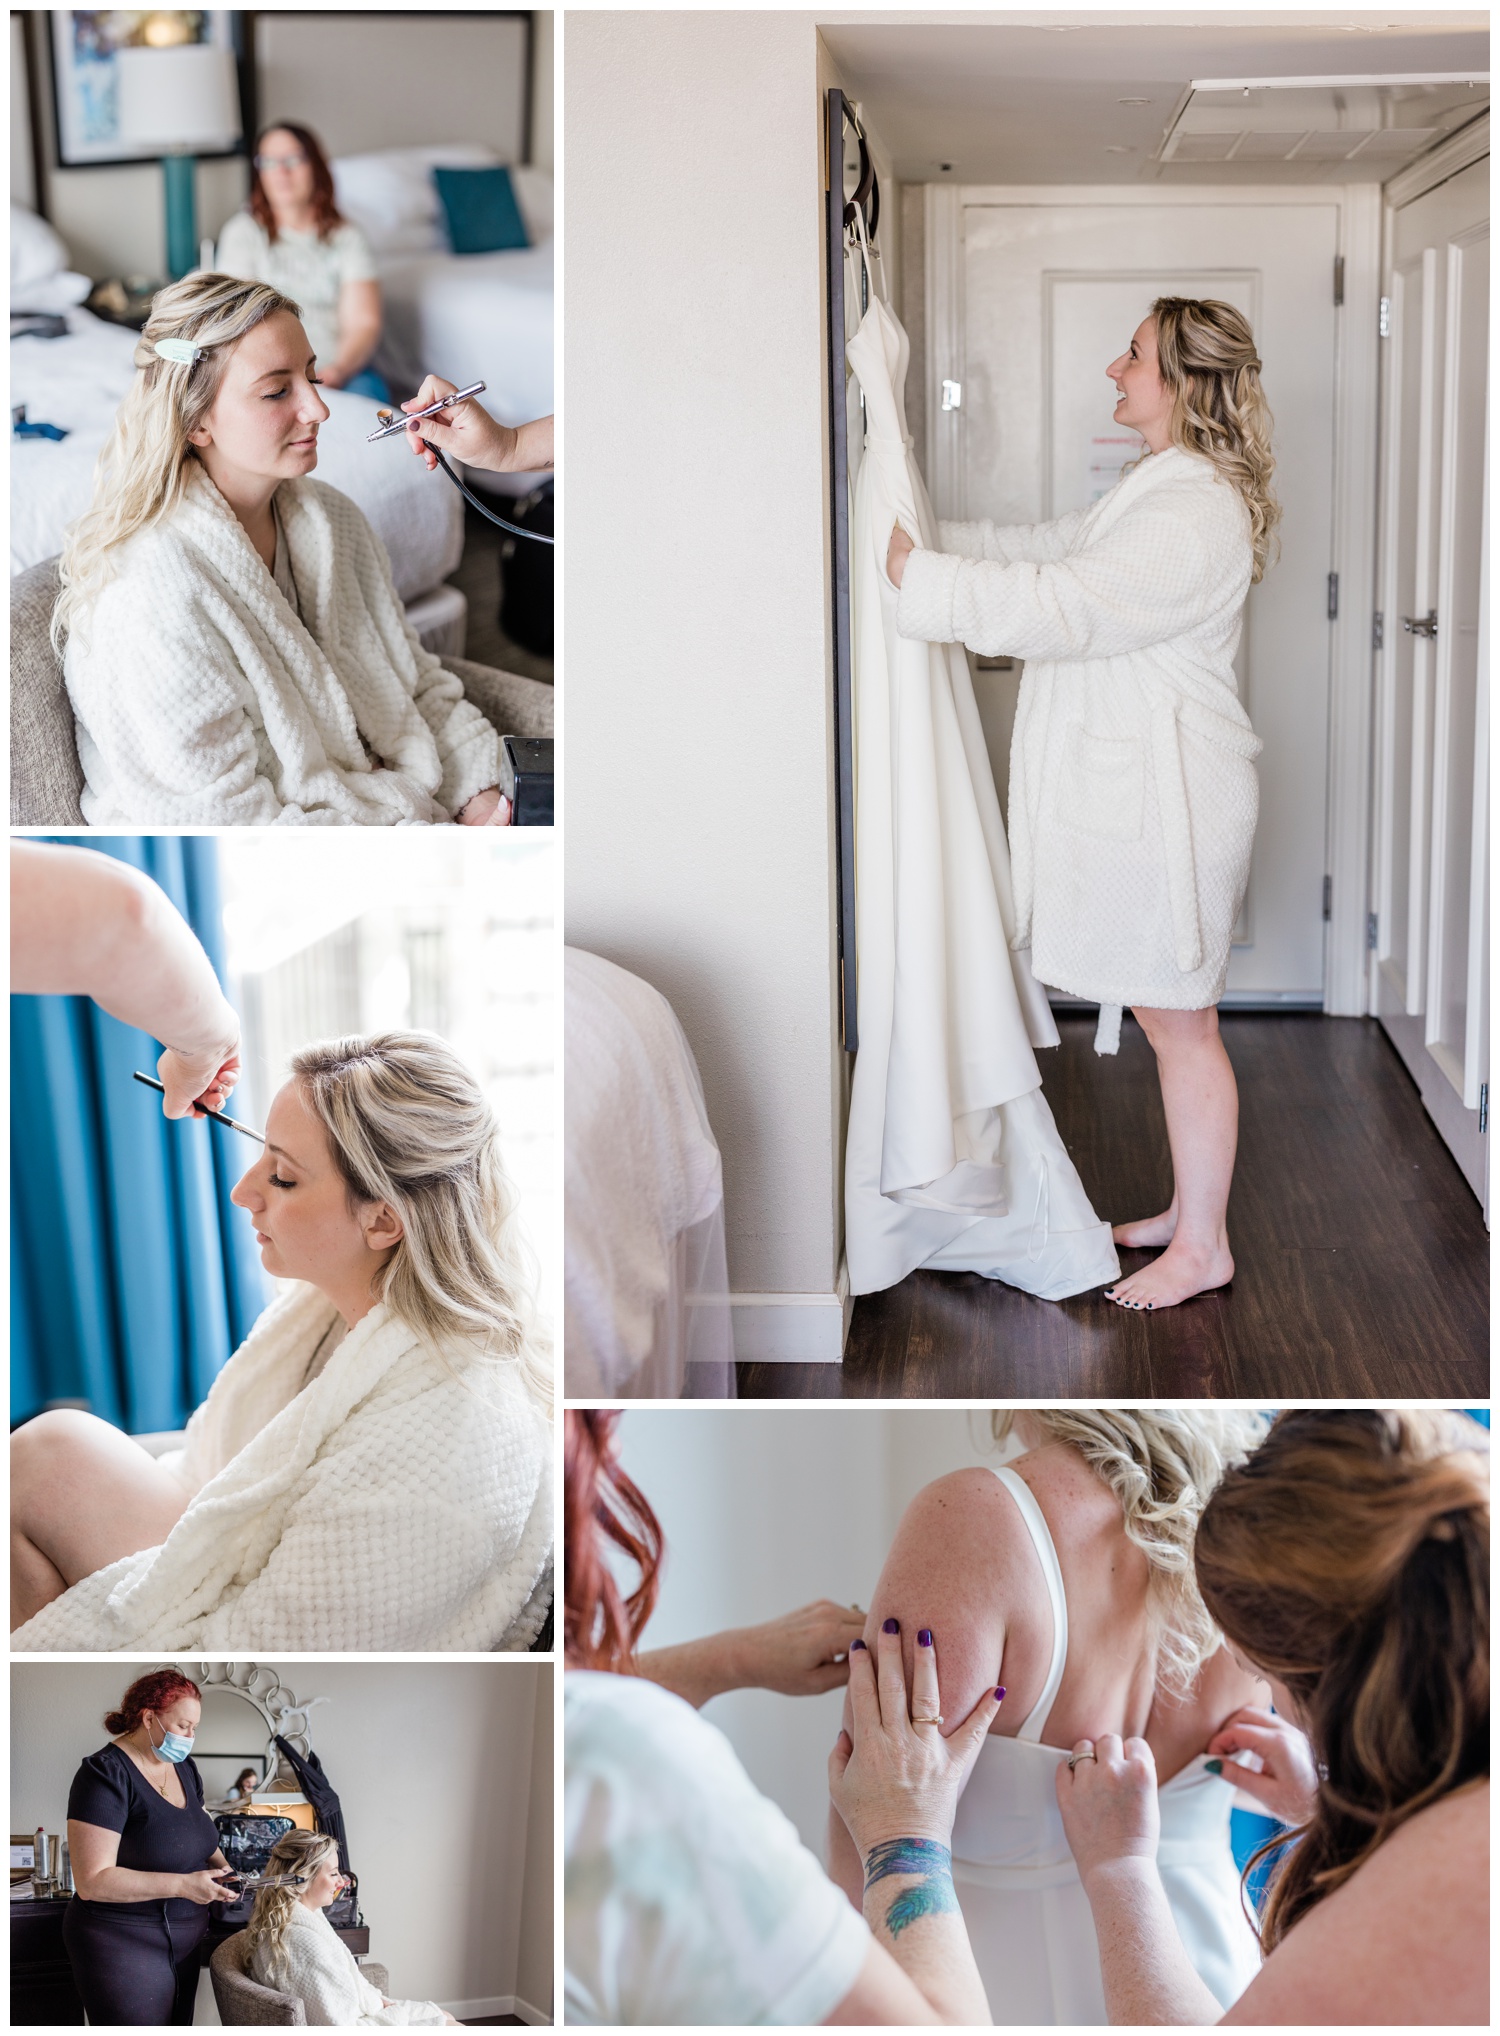 getting ready photos - apt b photography - makeup and hair by Royal Makeup and Hair